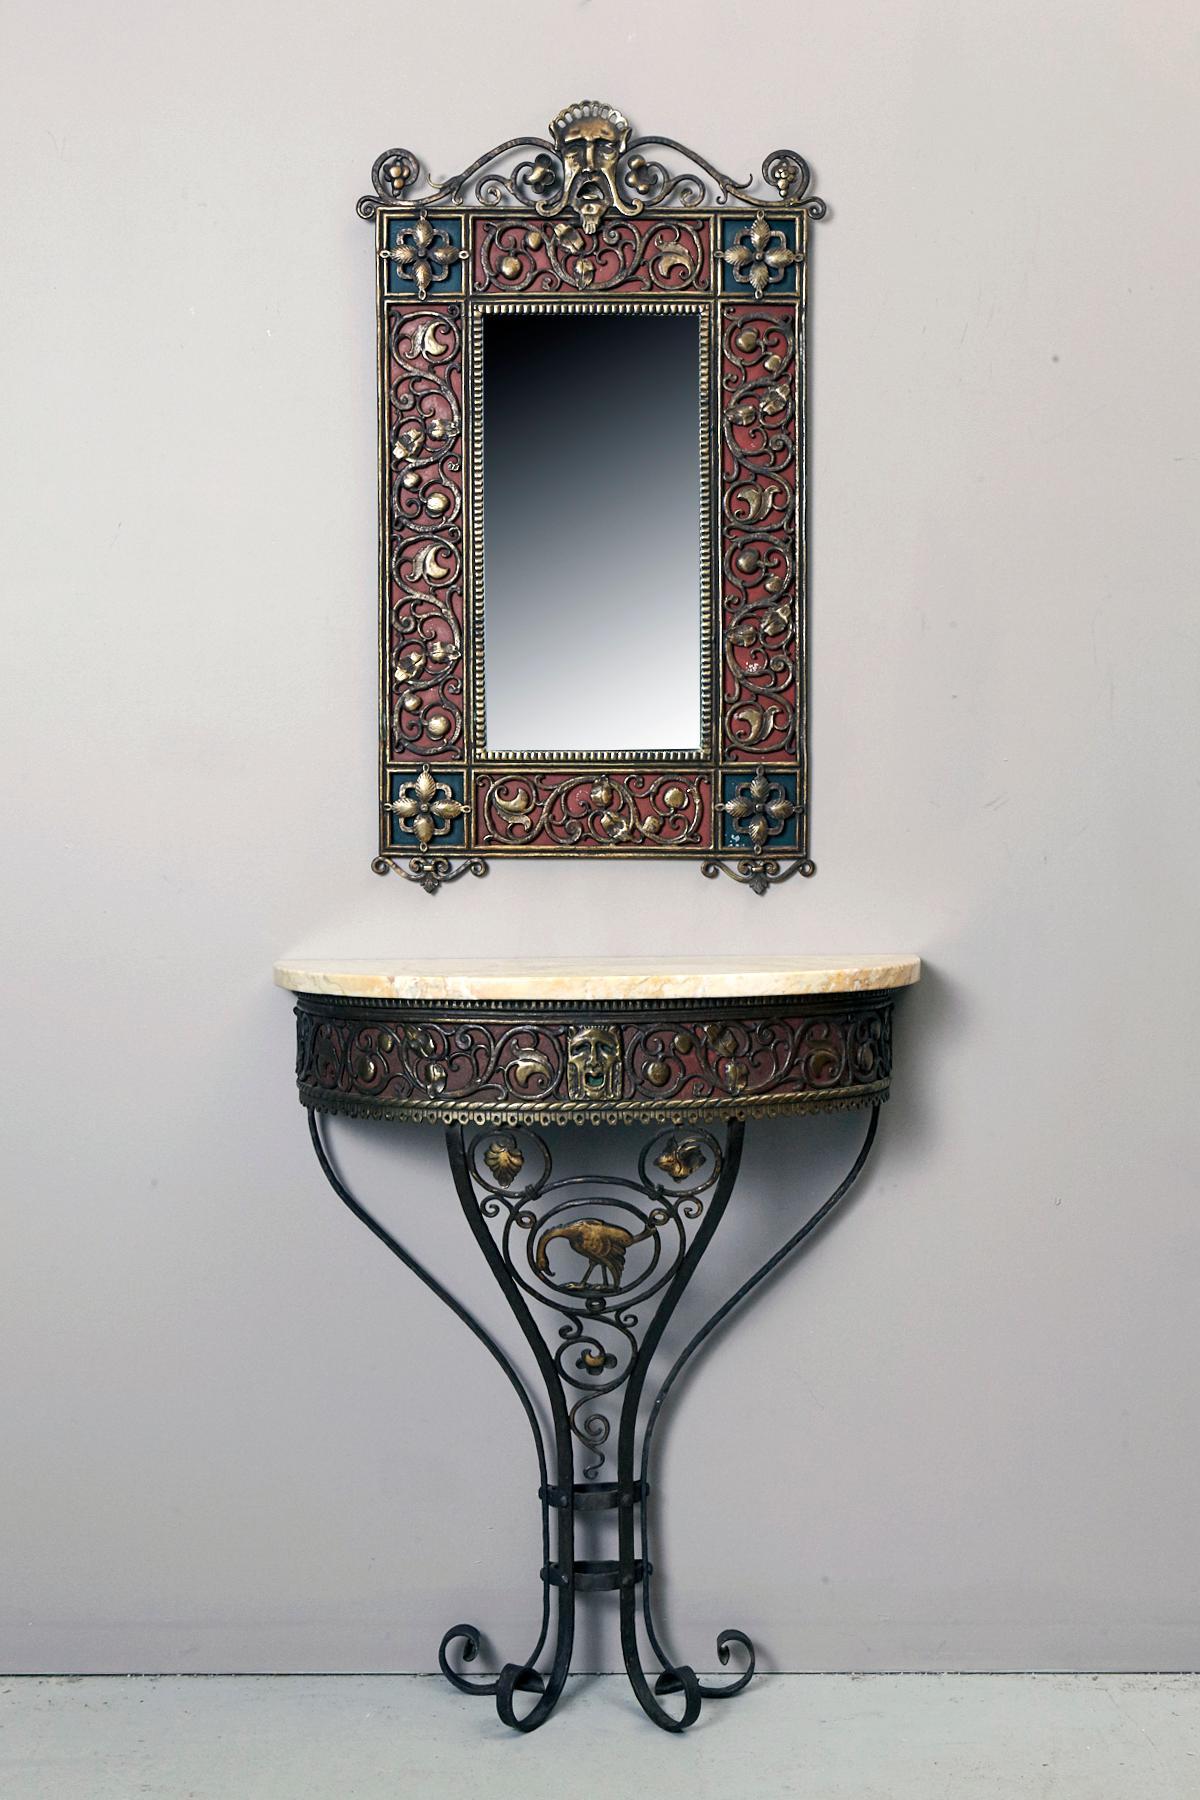 Italianate mirror and console set designed and manufactured by Oscar Bach, 1923.
Copper alloy with dark brown chemical patina, glass, lacquer, tinned sheet metal.

The mirror is referenced in on the official Oscar Bach website in the category